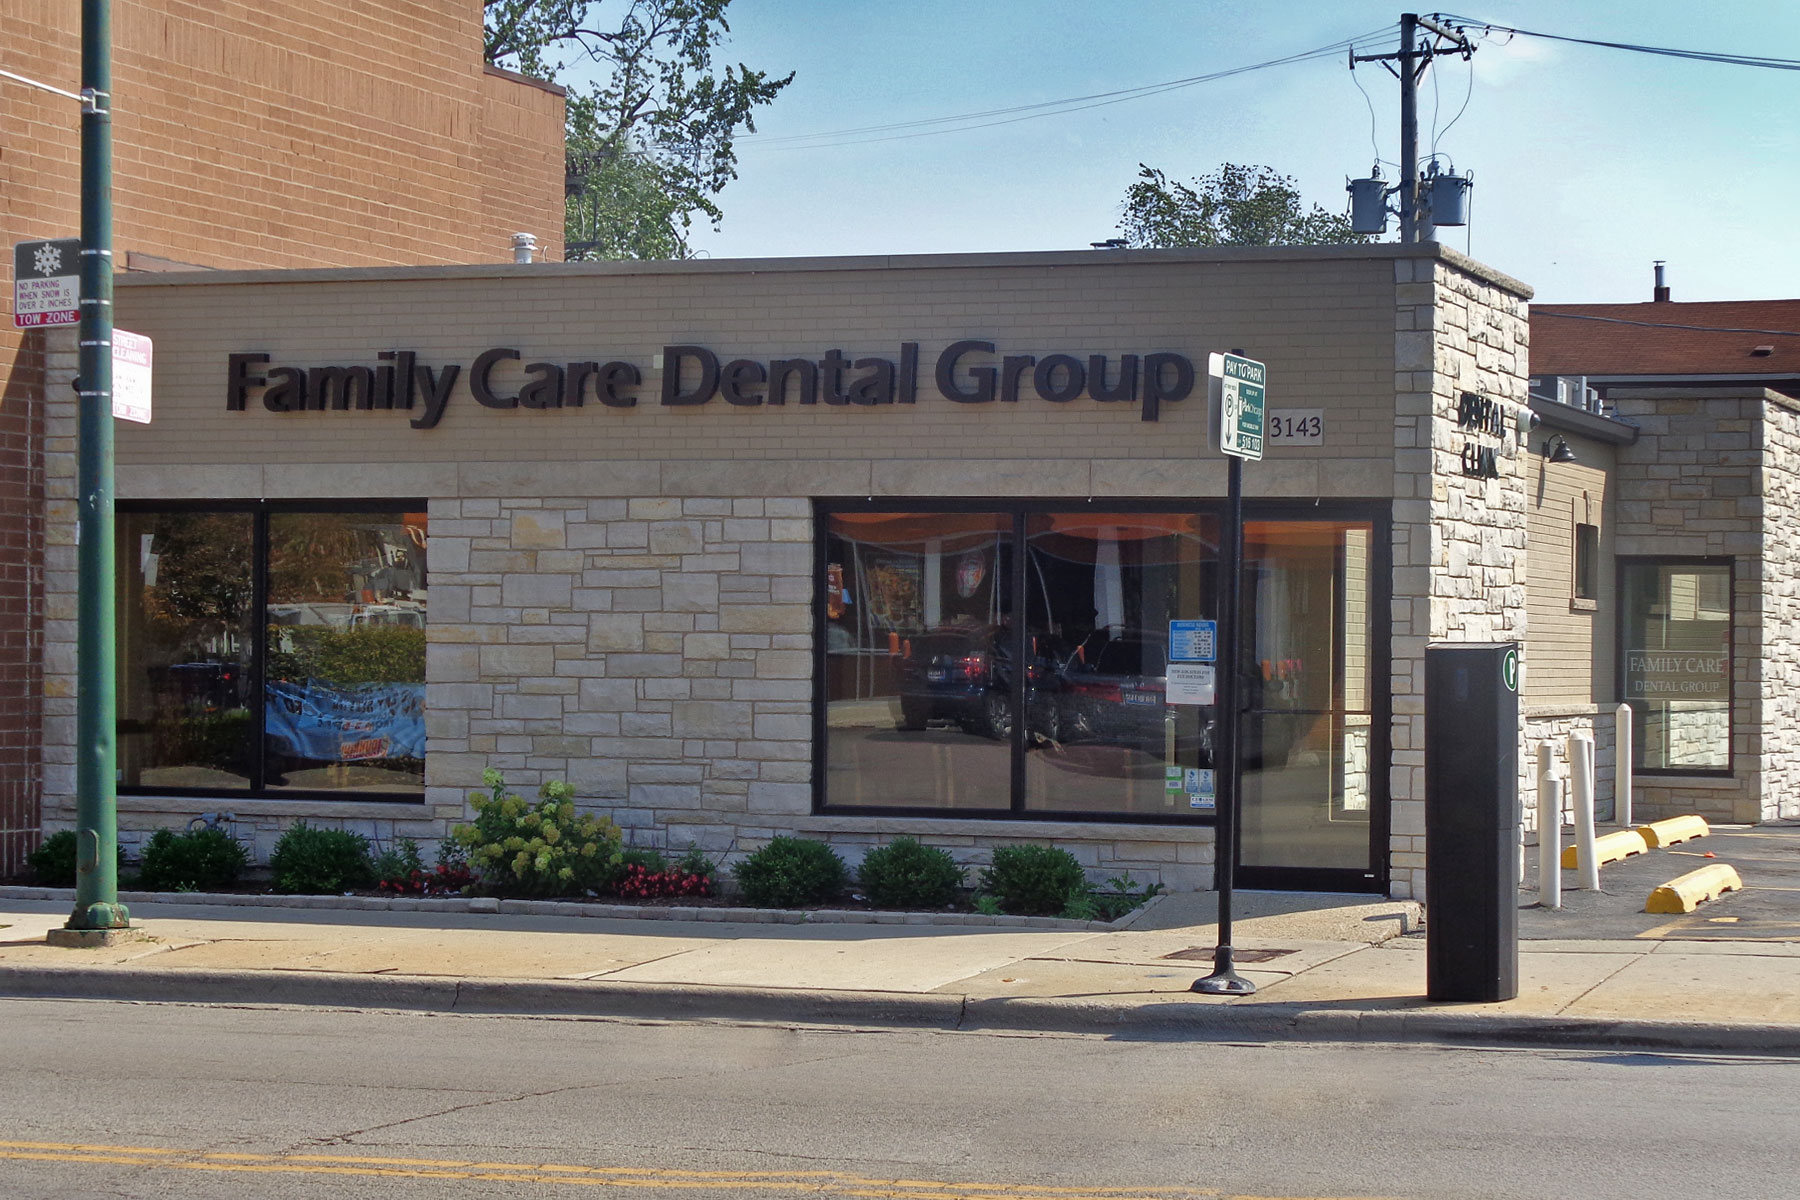 Family Care Dental Center Exterior - Family Care Dental Center, Chicago Custom Home. America's Custom Home Builders: New Construction, Remodeling, Restoration Services. Residential and Commercial.